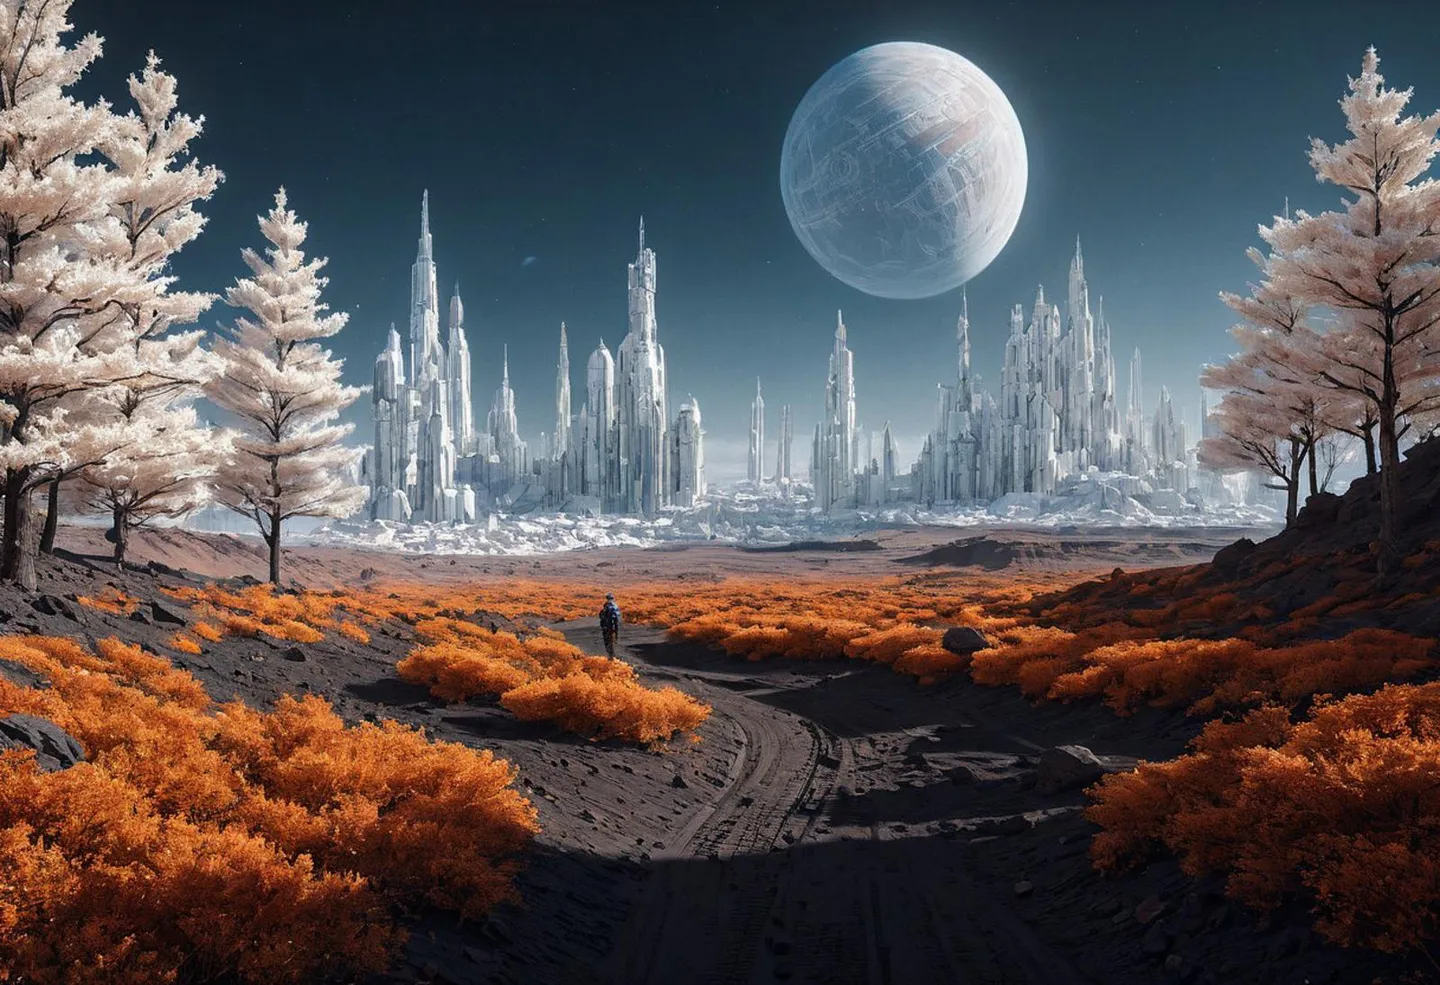 A futuristic cityscape under a large planet, surrounded by alien vegetation with white trees and orange shrubs, AI generated using Stable Diffusion.